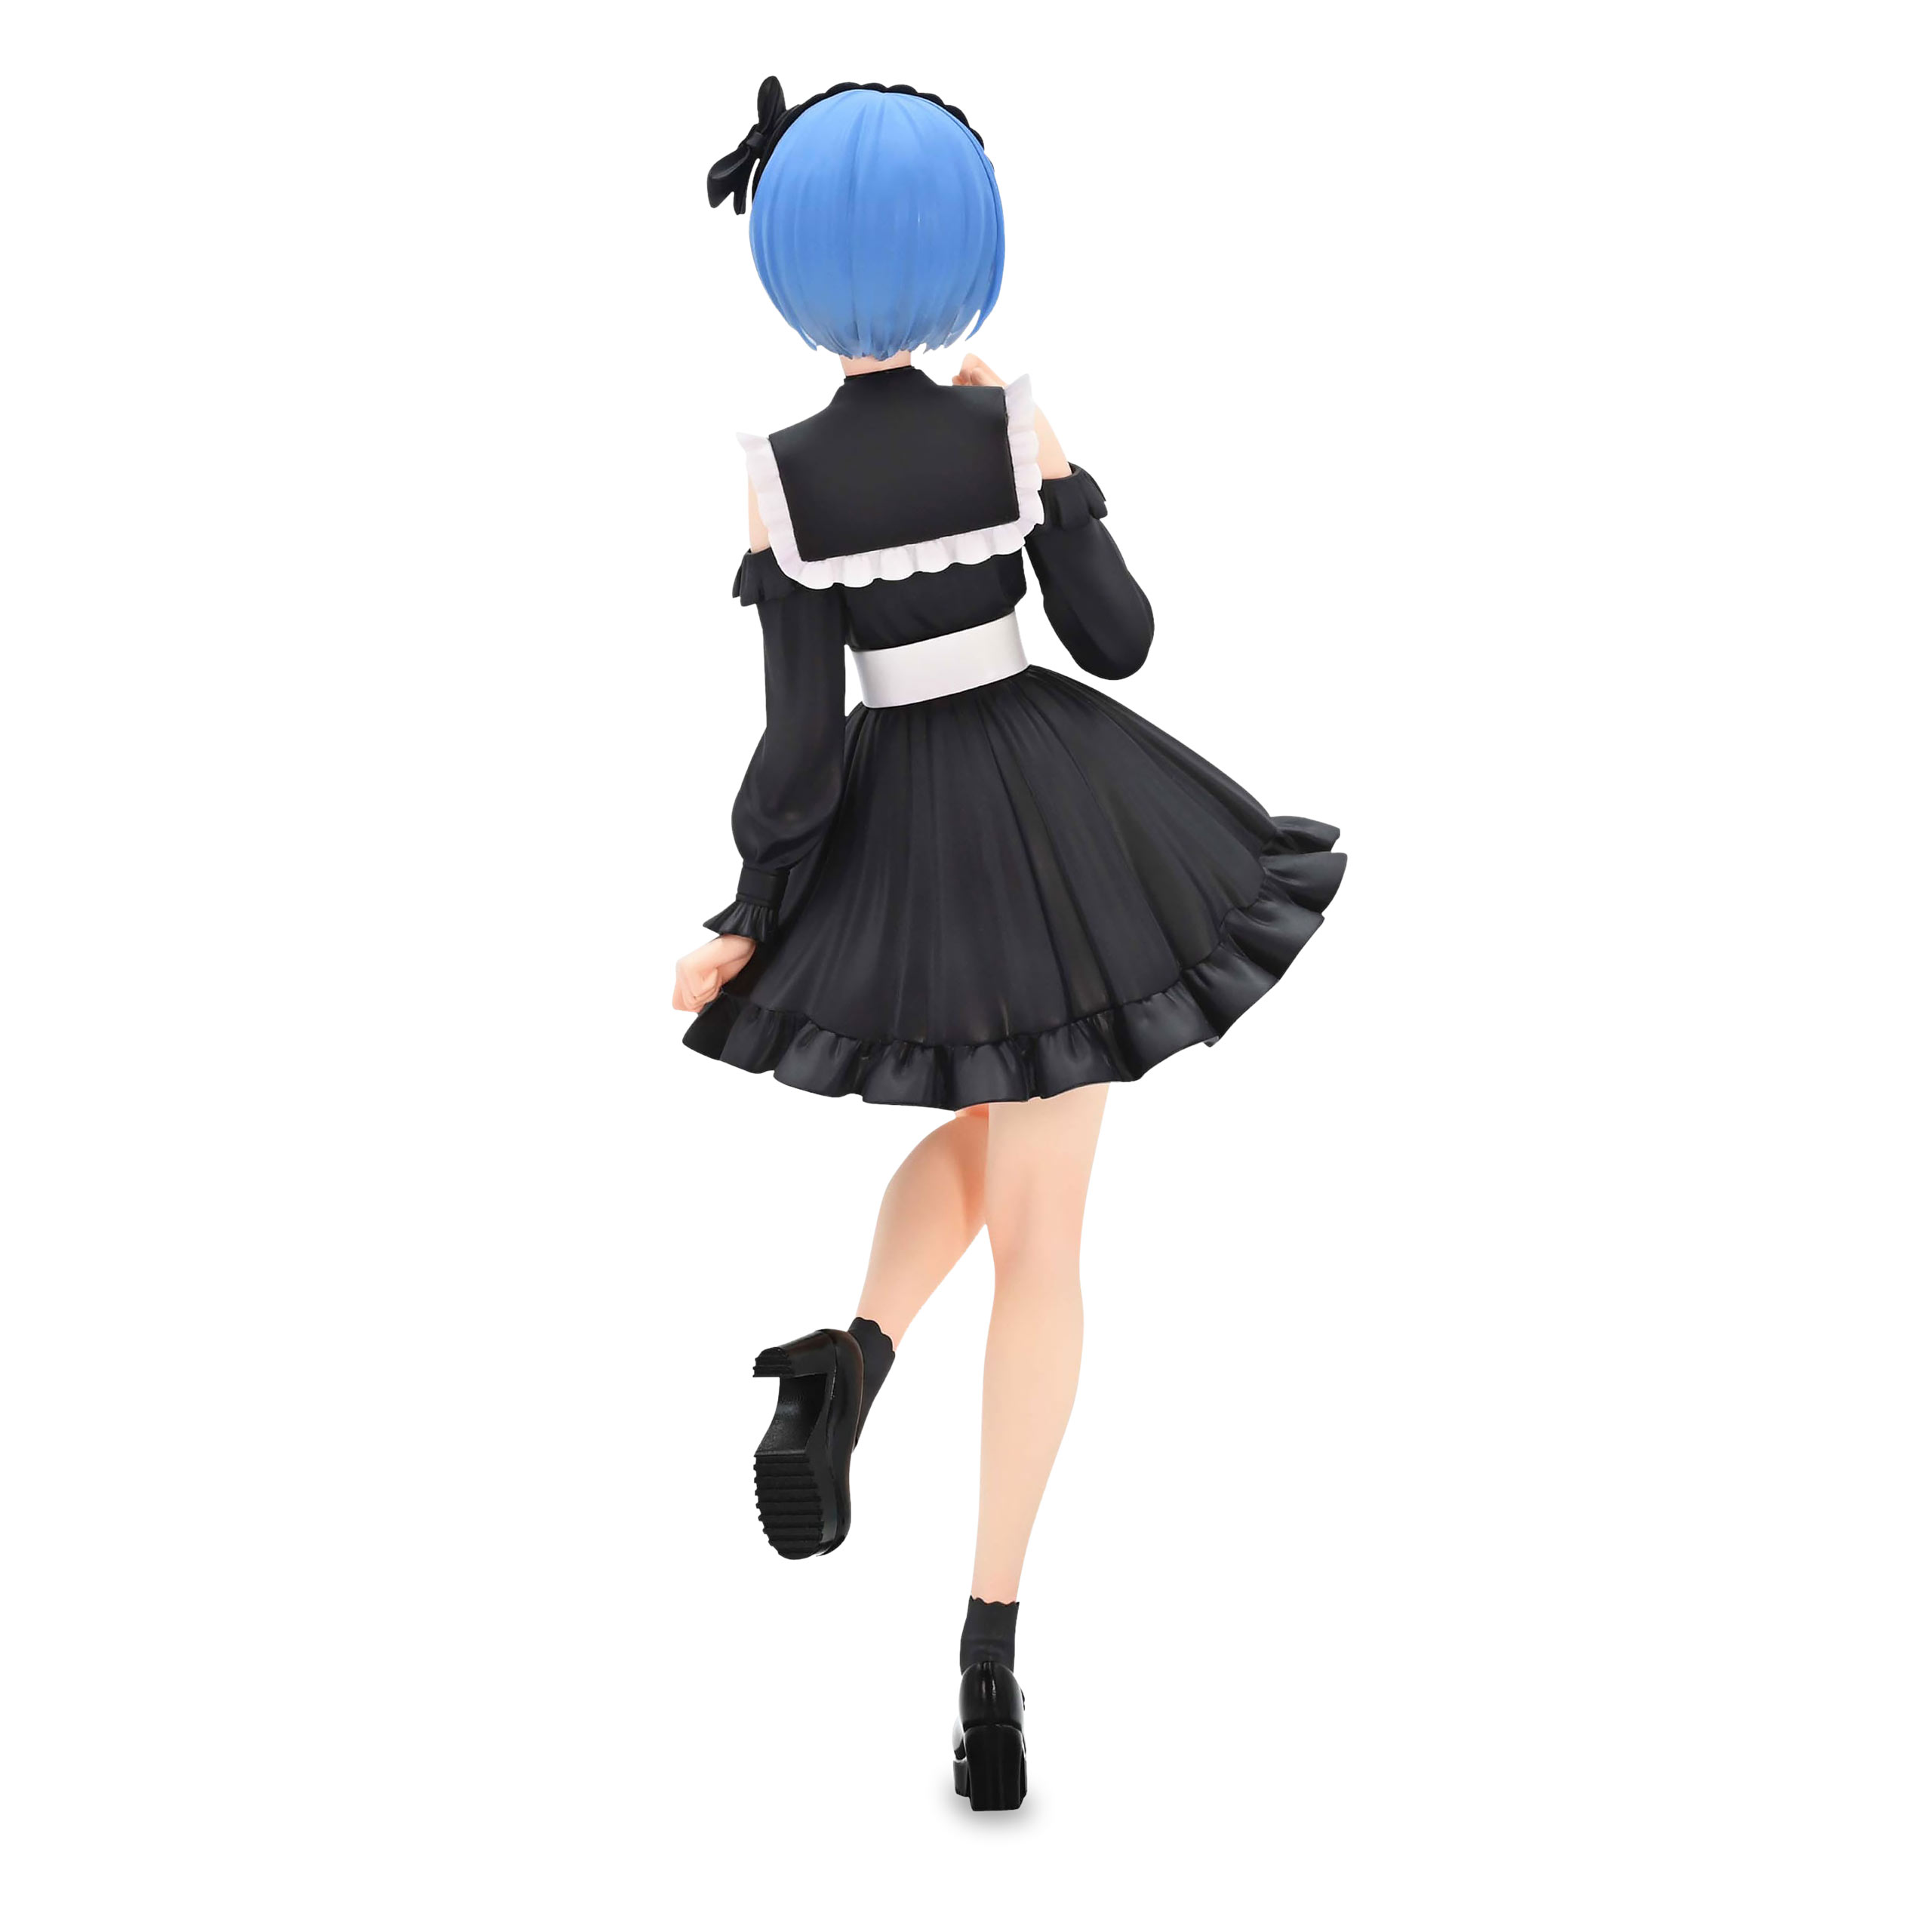 Re:Zero - Rem Girly Outfit Black Figure